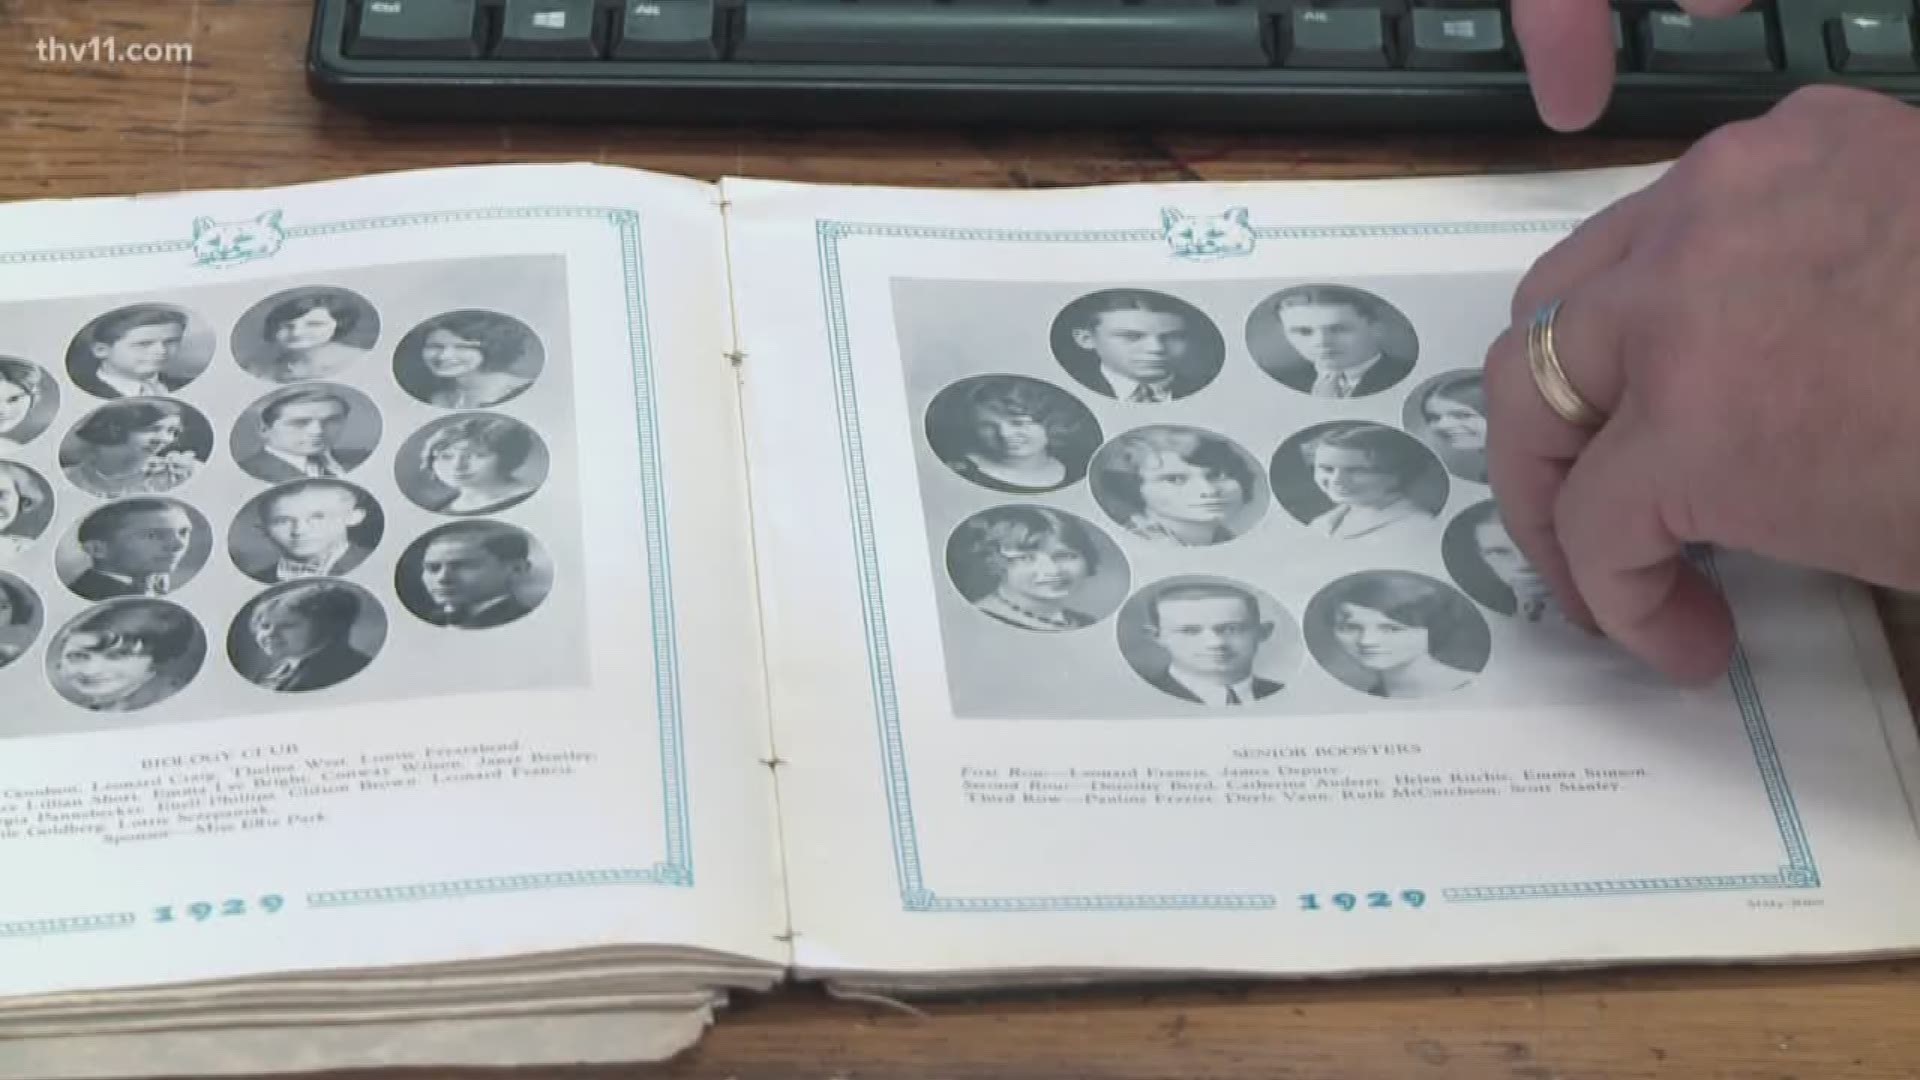 The North Little Rock School District is bringing its history into the 21st century by digitizing all their old yearbooks, going all the way back to 1917.